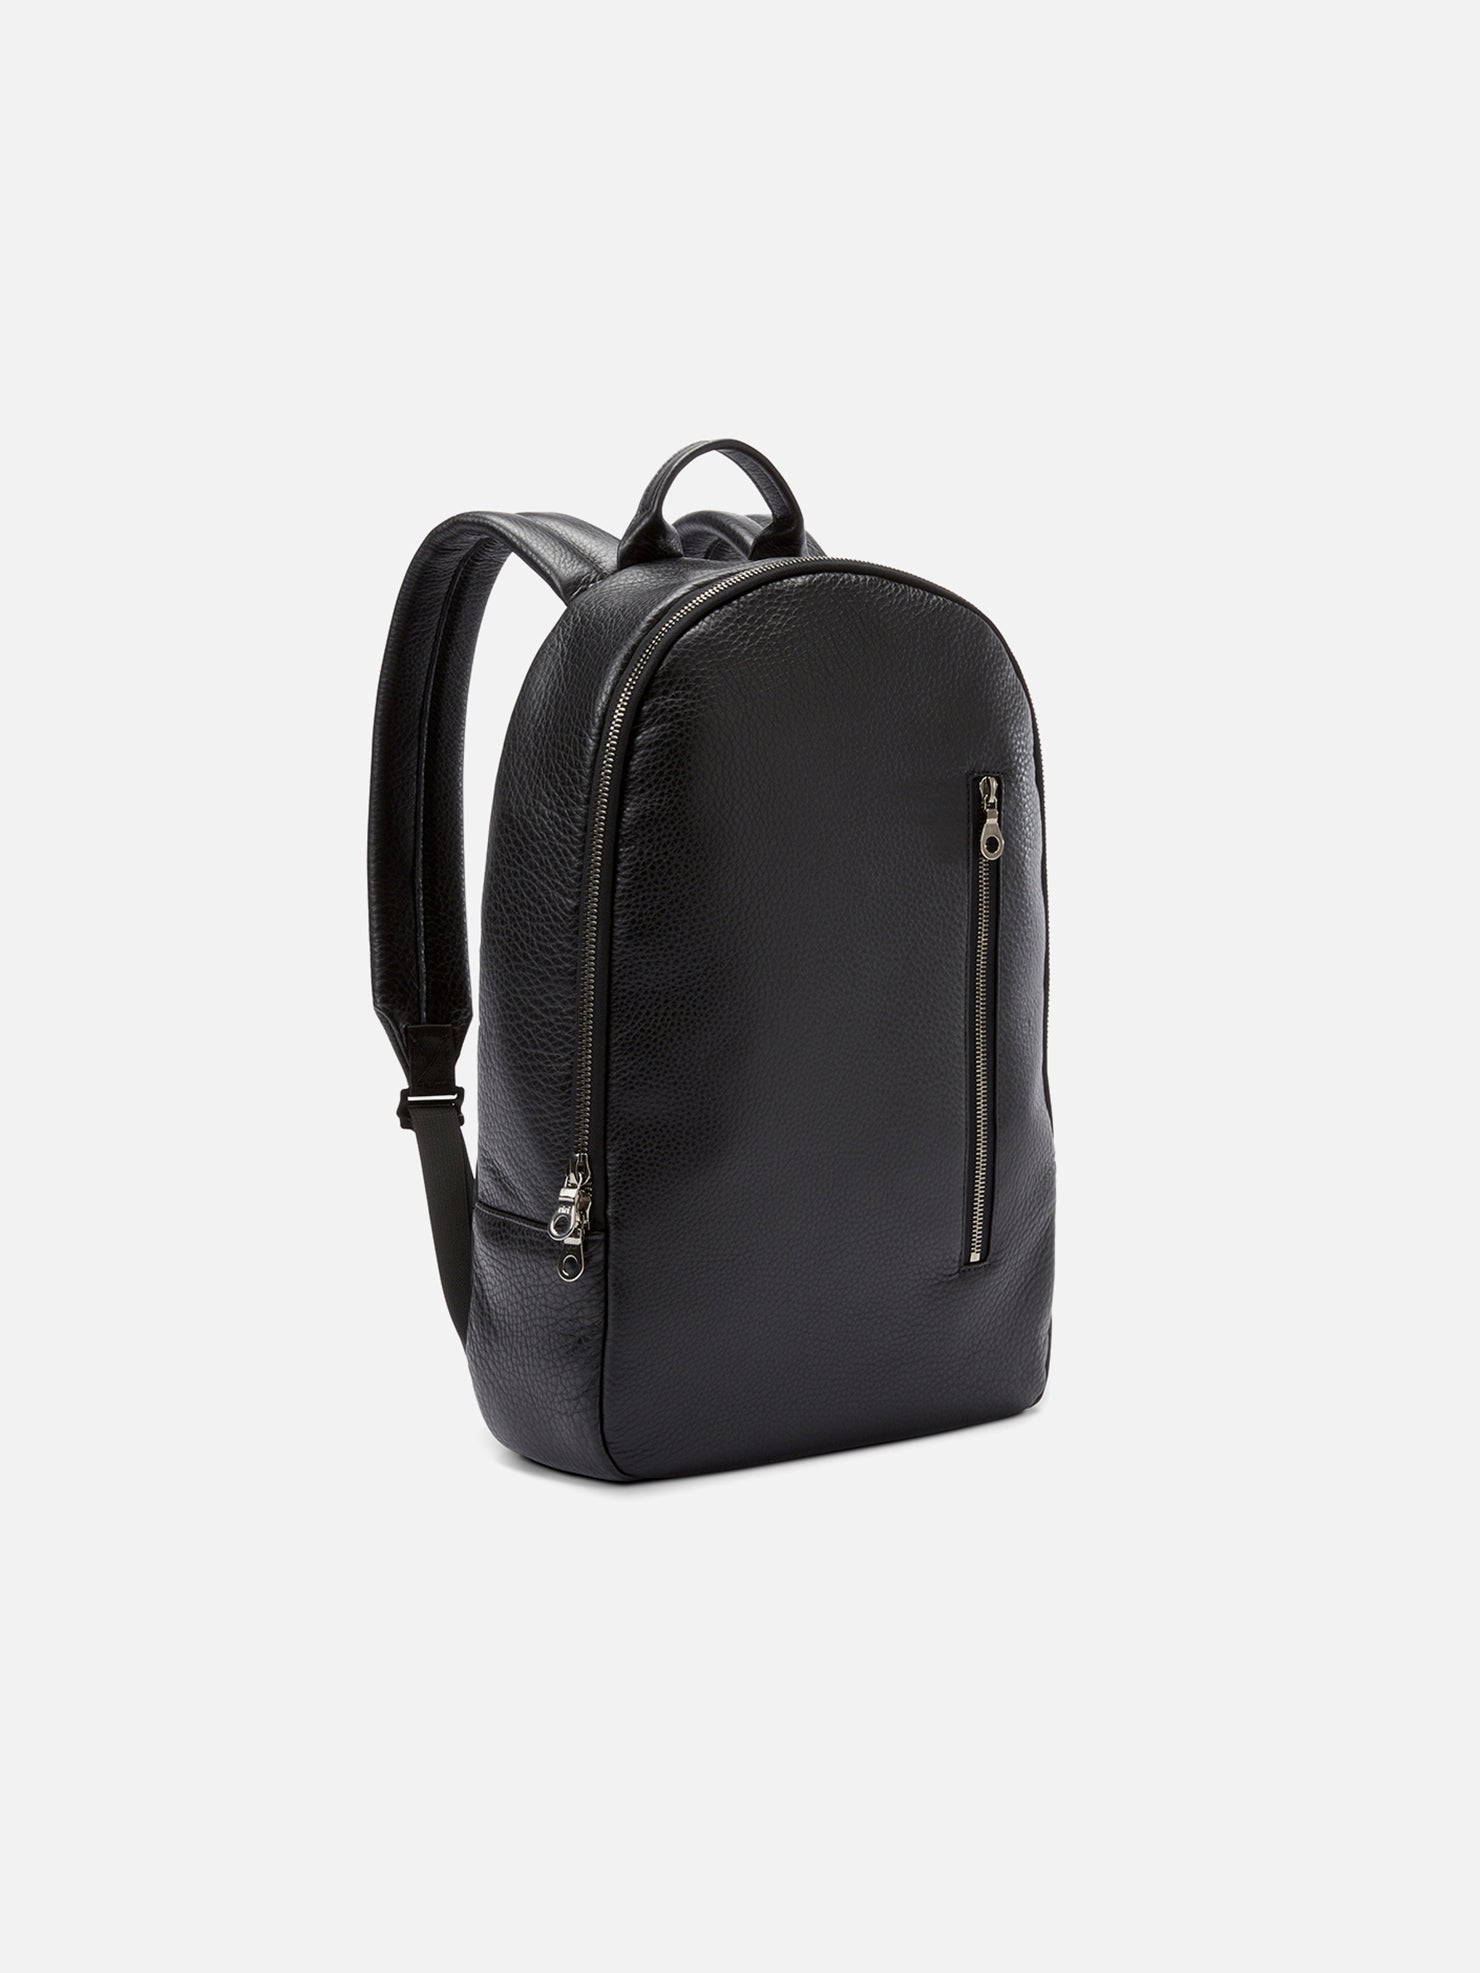 patent leather backpack